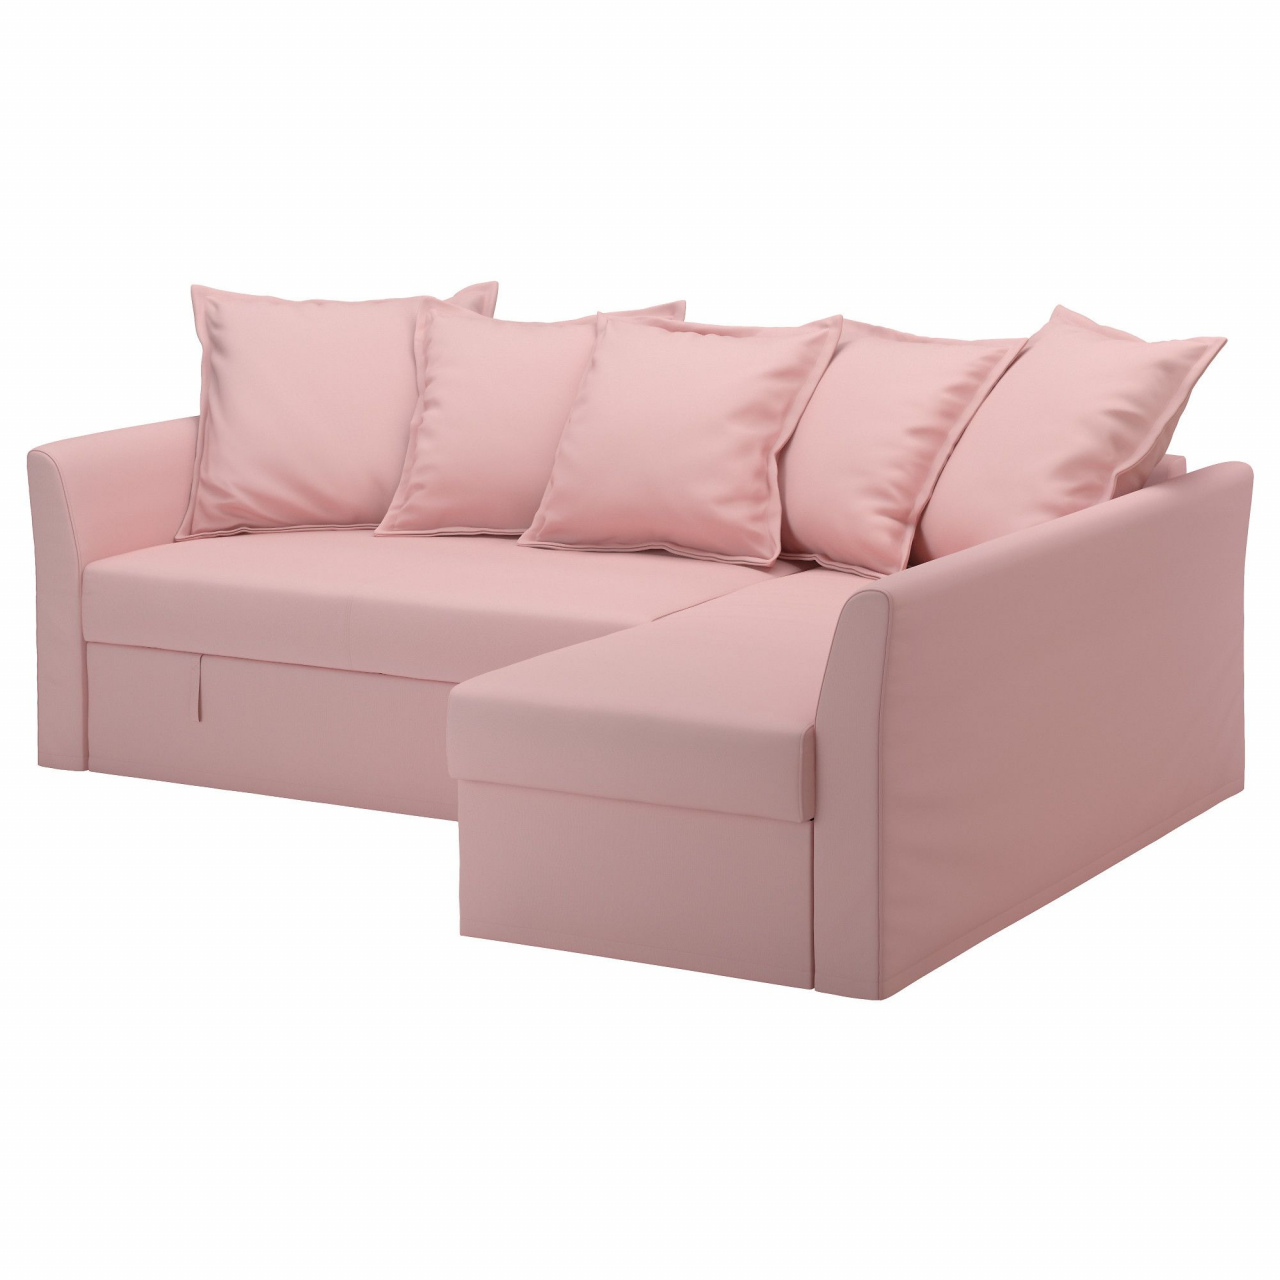 holmsund sofa bed ikea holmsund sofa bed with chaise ransta light pink cover durch holmsund sofa bed